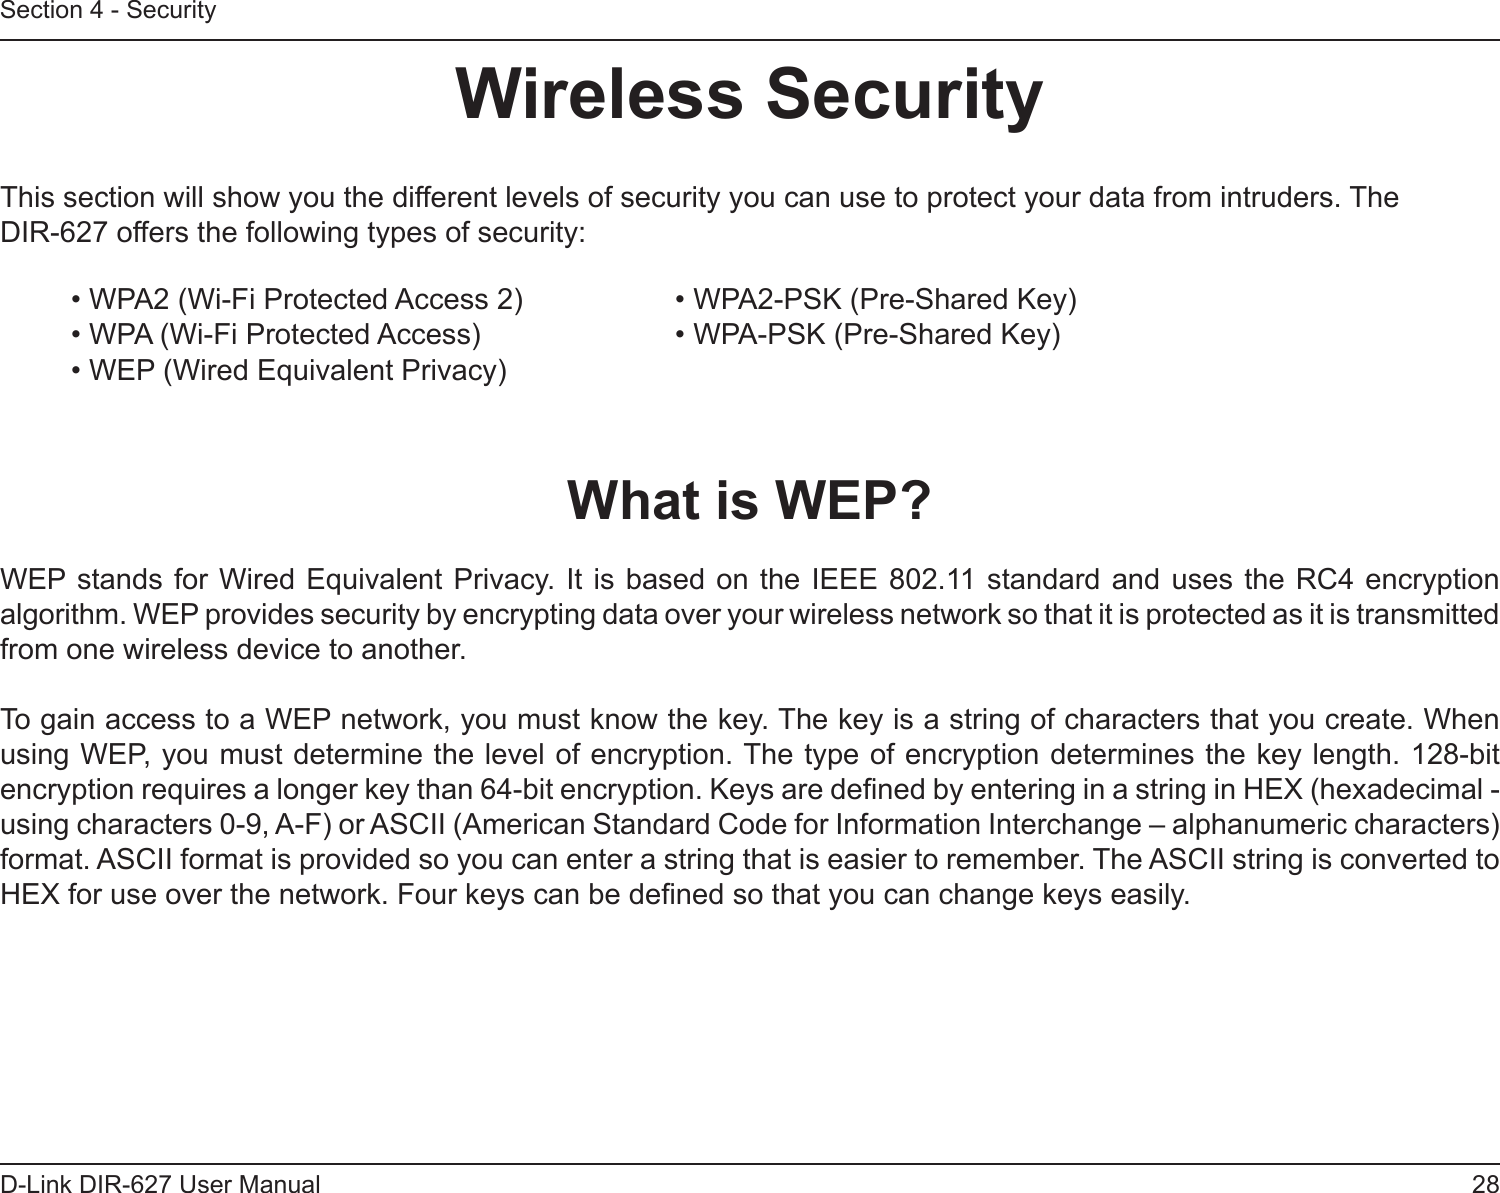 28D-Link DIR-627 User ManualSection 4 - SecurityWirelessSecurityThis section will show you the different levels of security you can use to protect your data from intruders. The DIR-627 offers the following types of security:• WPA2 (Wi-Fi Protected Access 2)     • WPA2-PSK (Pre-Shared Key)• WPA (Wi-Fi Protected Access)      • WPA-PSK (Pre-Shared Key)• WEP (Wired Equivalent Privacy)WhatisWEP?WEP stands for  Wired Equivalent Privacy. It is based  on the IEEE 802.11 standard and  uses the RC4 encryption algorithm. WEP provides security by encrypting data over your wireless network so that it is protected as it is transmitted from one wireless device to another.To gain access to a WEP network, you must know the key. The key is a string of characters that you create. When using WEP, you must determine the level of encryption. The type of encryption determines the key length. 128-bit encryption requires a longer key than 64-bit encryption. Keys are dened by entering in a string in HEX (hexadecimal - using characters 0-9, A-F) or ASCII (American Standard Code for Information Interchange – alphanumeric characters) format. ASCII format is provided so you can enter a string that is easier to remember. The ASCII string is converted to HEX for use over the network. Four keys can be dened so that you can change keys easily.